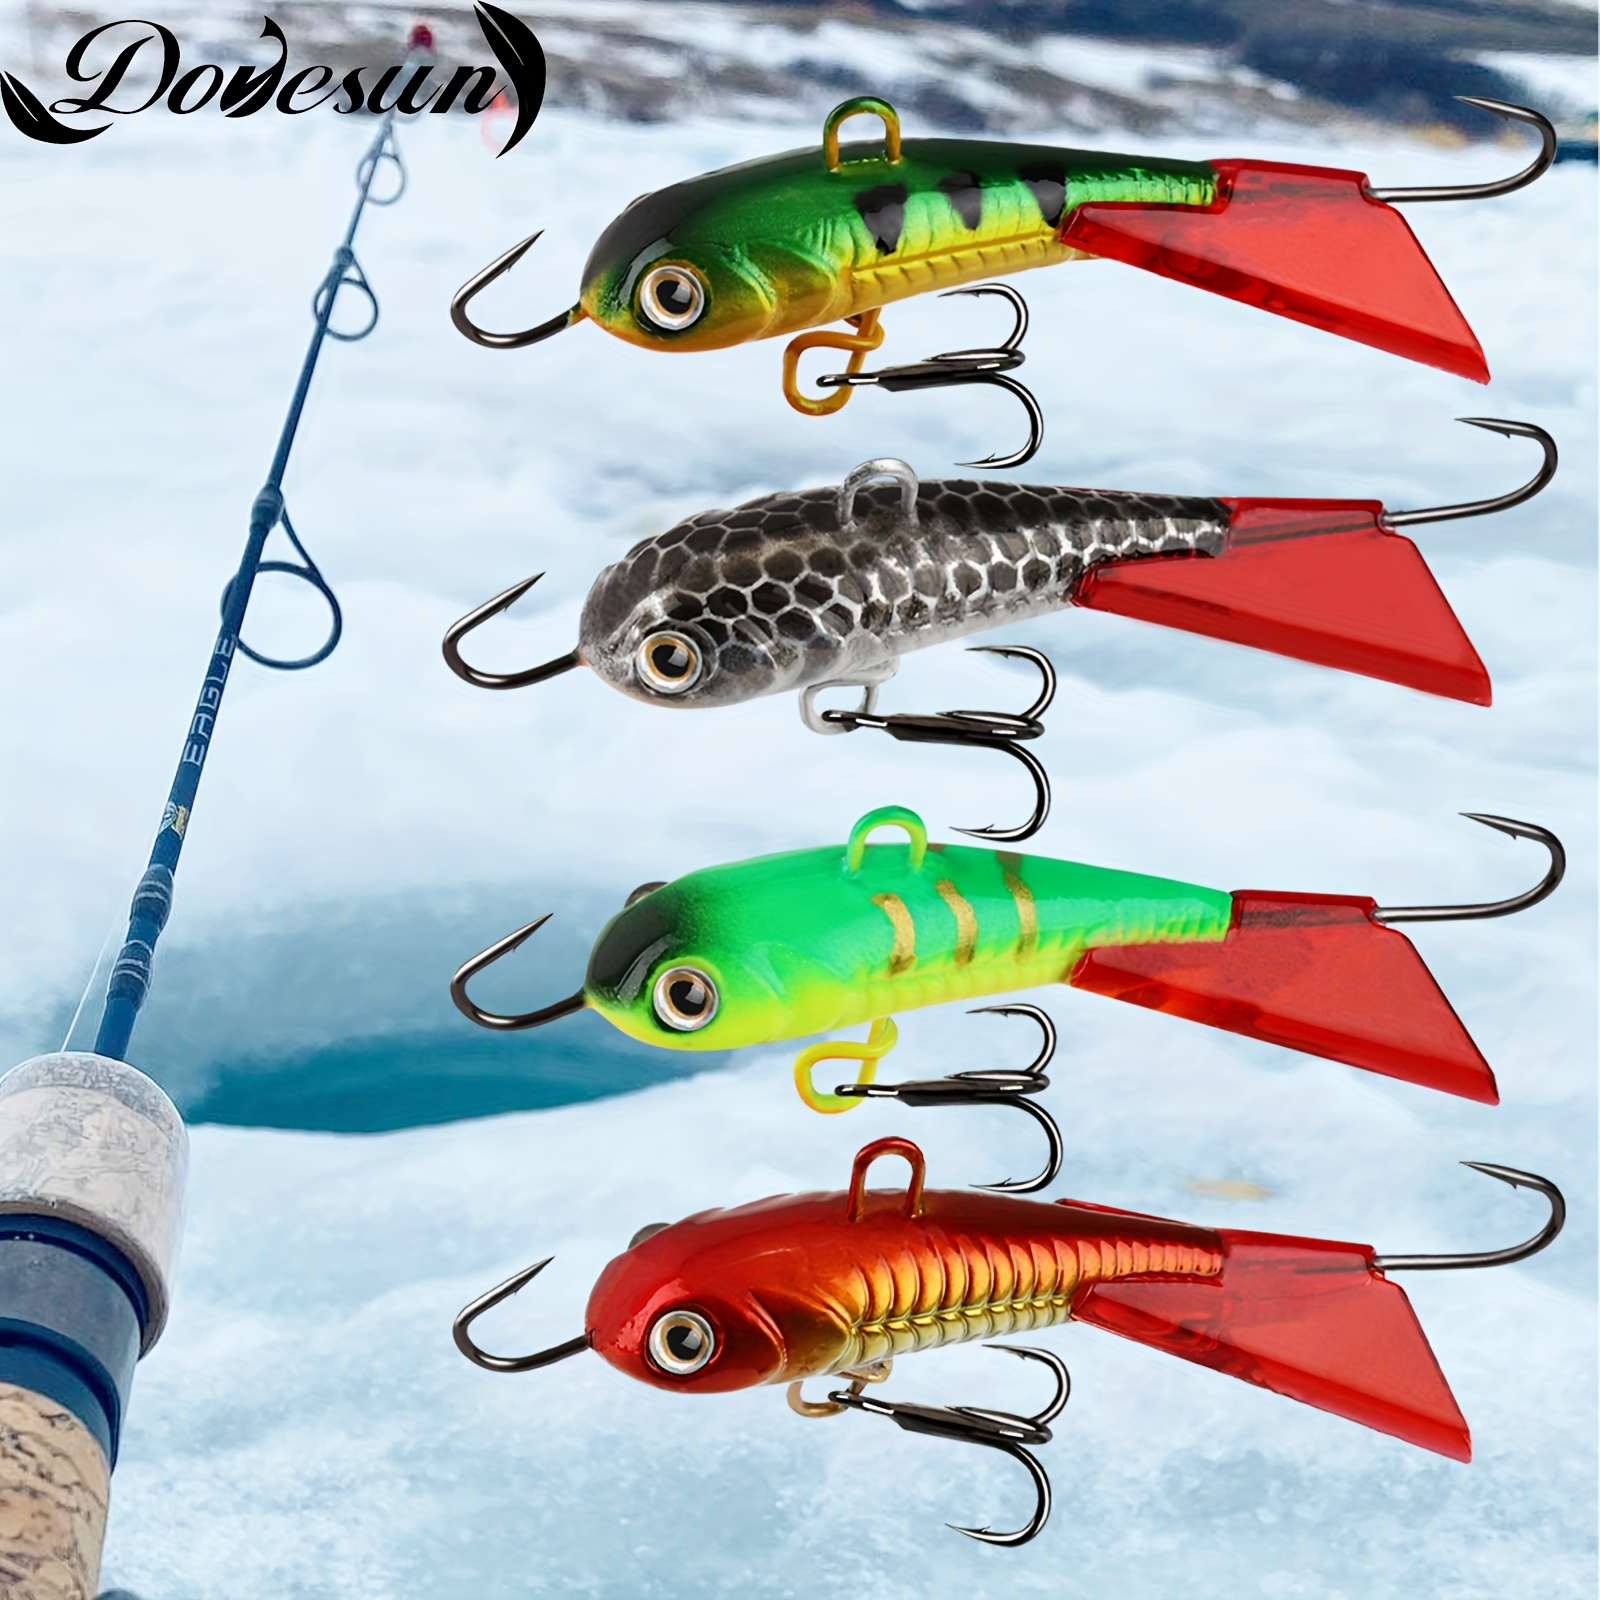 Goture Ice Fishing Jigs Kit Ice Fishing Lures,Ice Fishing Jigging Lures,Ice  Jigs Ice Fishing Bait for Crappie Panfish Walleye Bluegill Pike Perch Ice